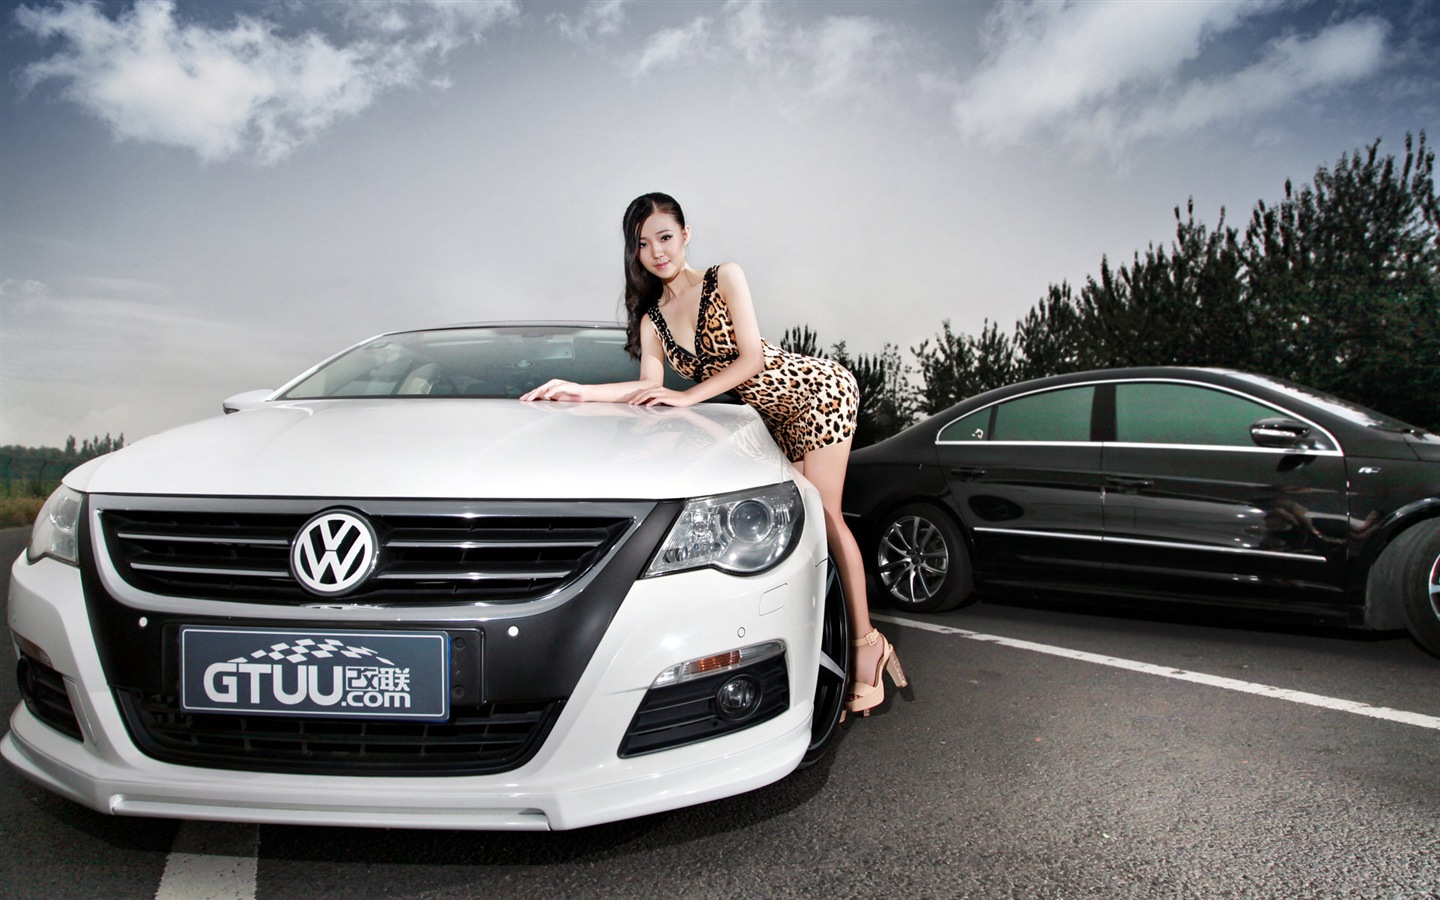 Beautiful leopard dress girl with Volkswagen sports car wallpapers #10 - 1440x900